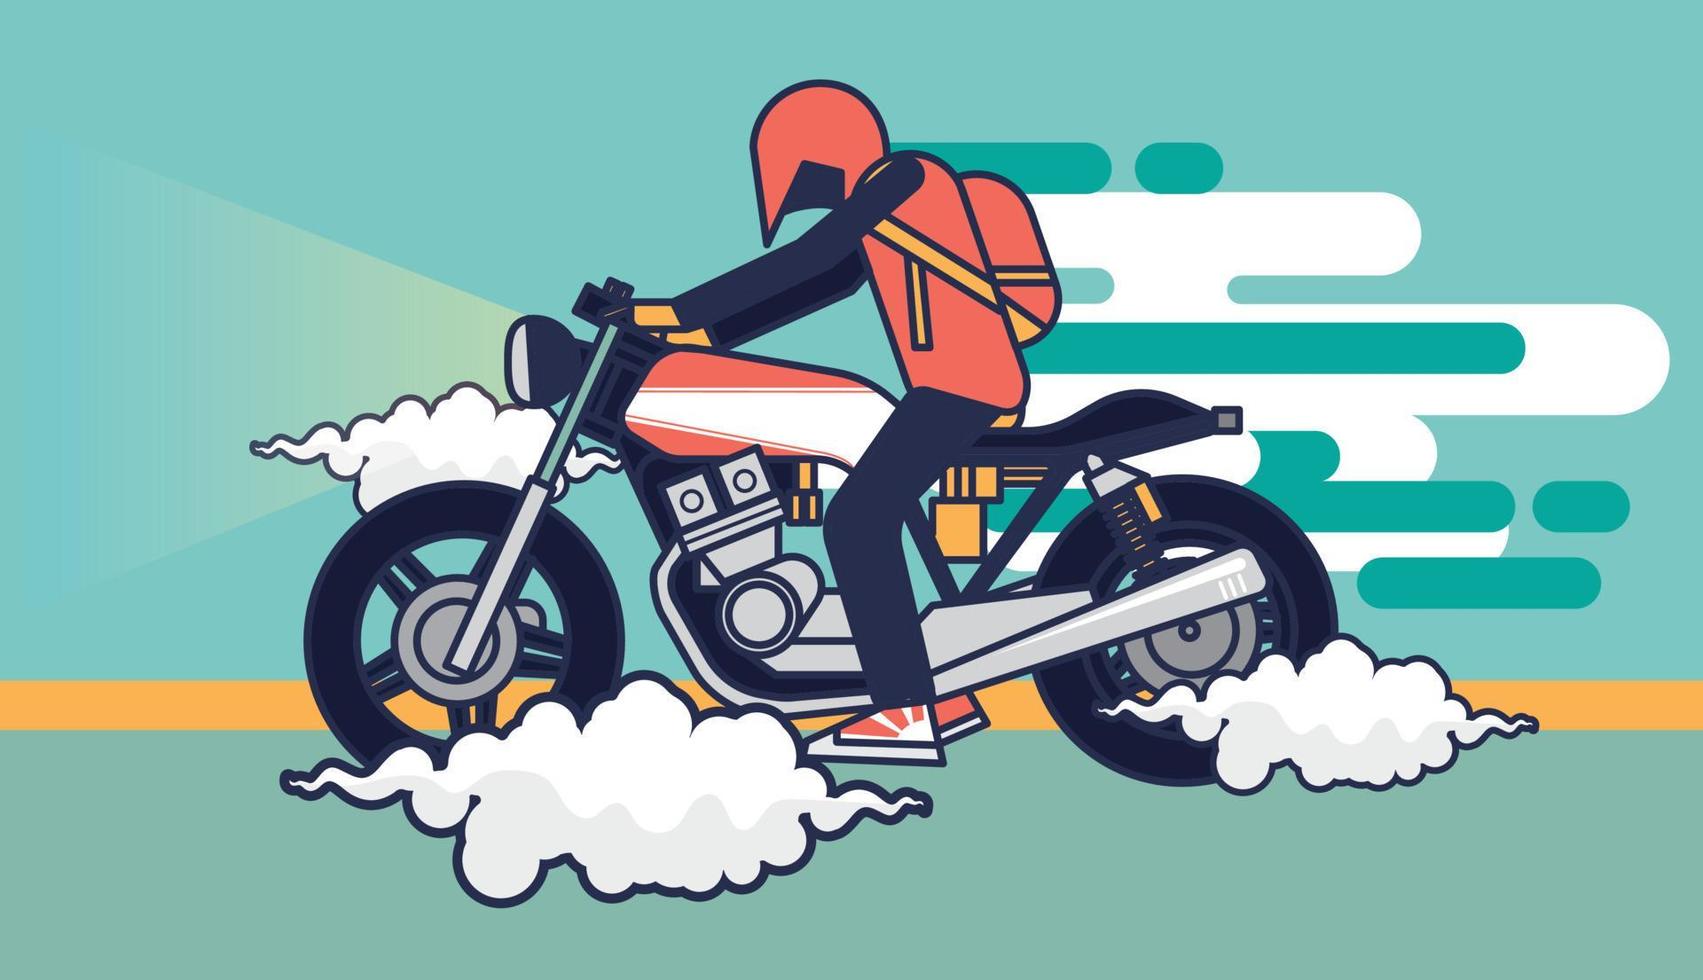 Old and Vintage mortorcycle vector